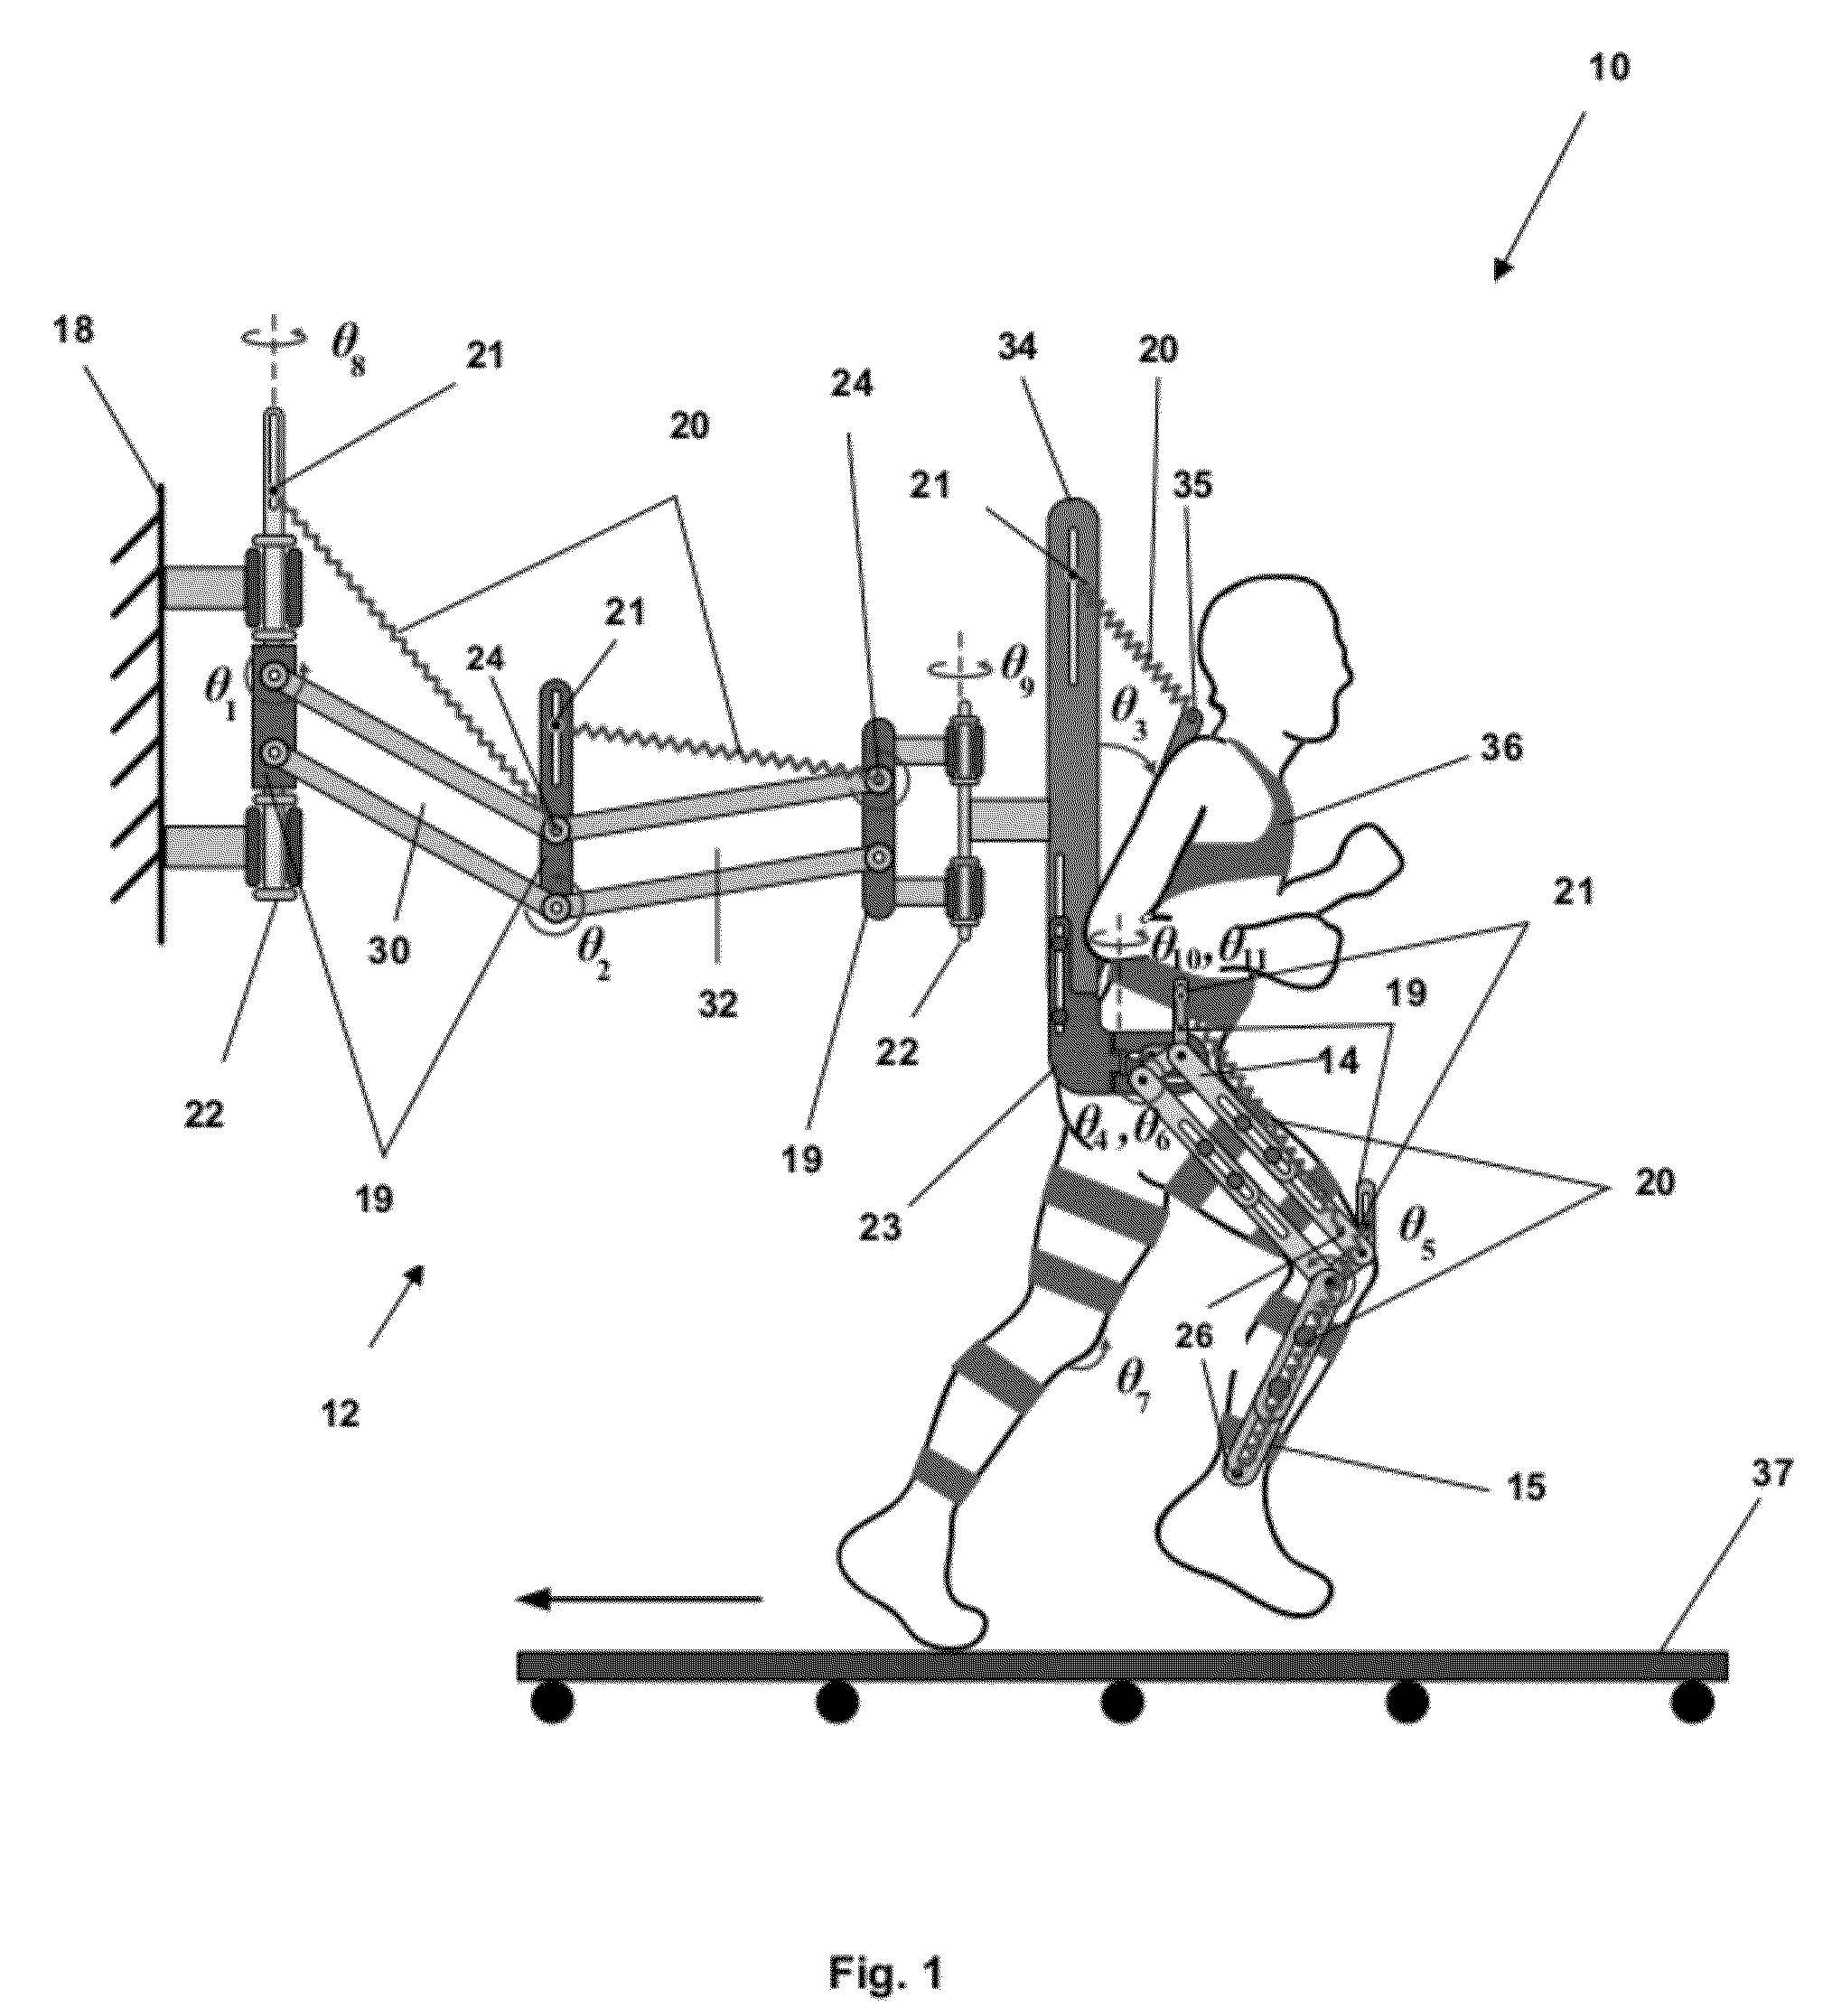 Apparatus and method for reduced-gravity simulation